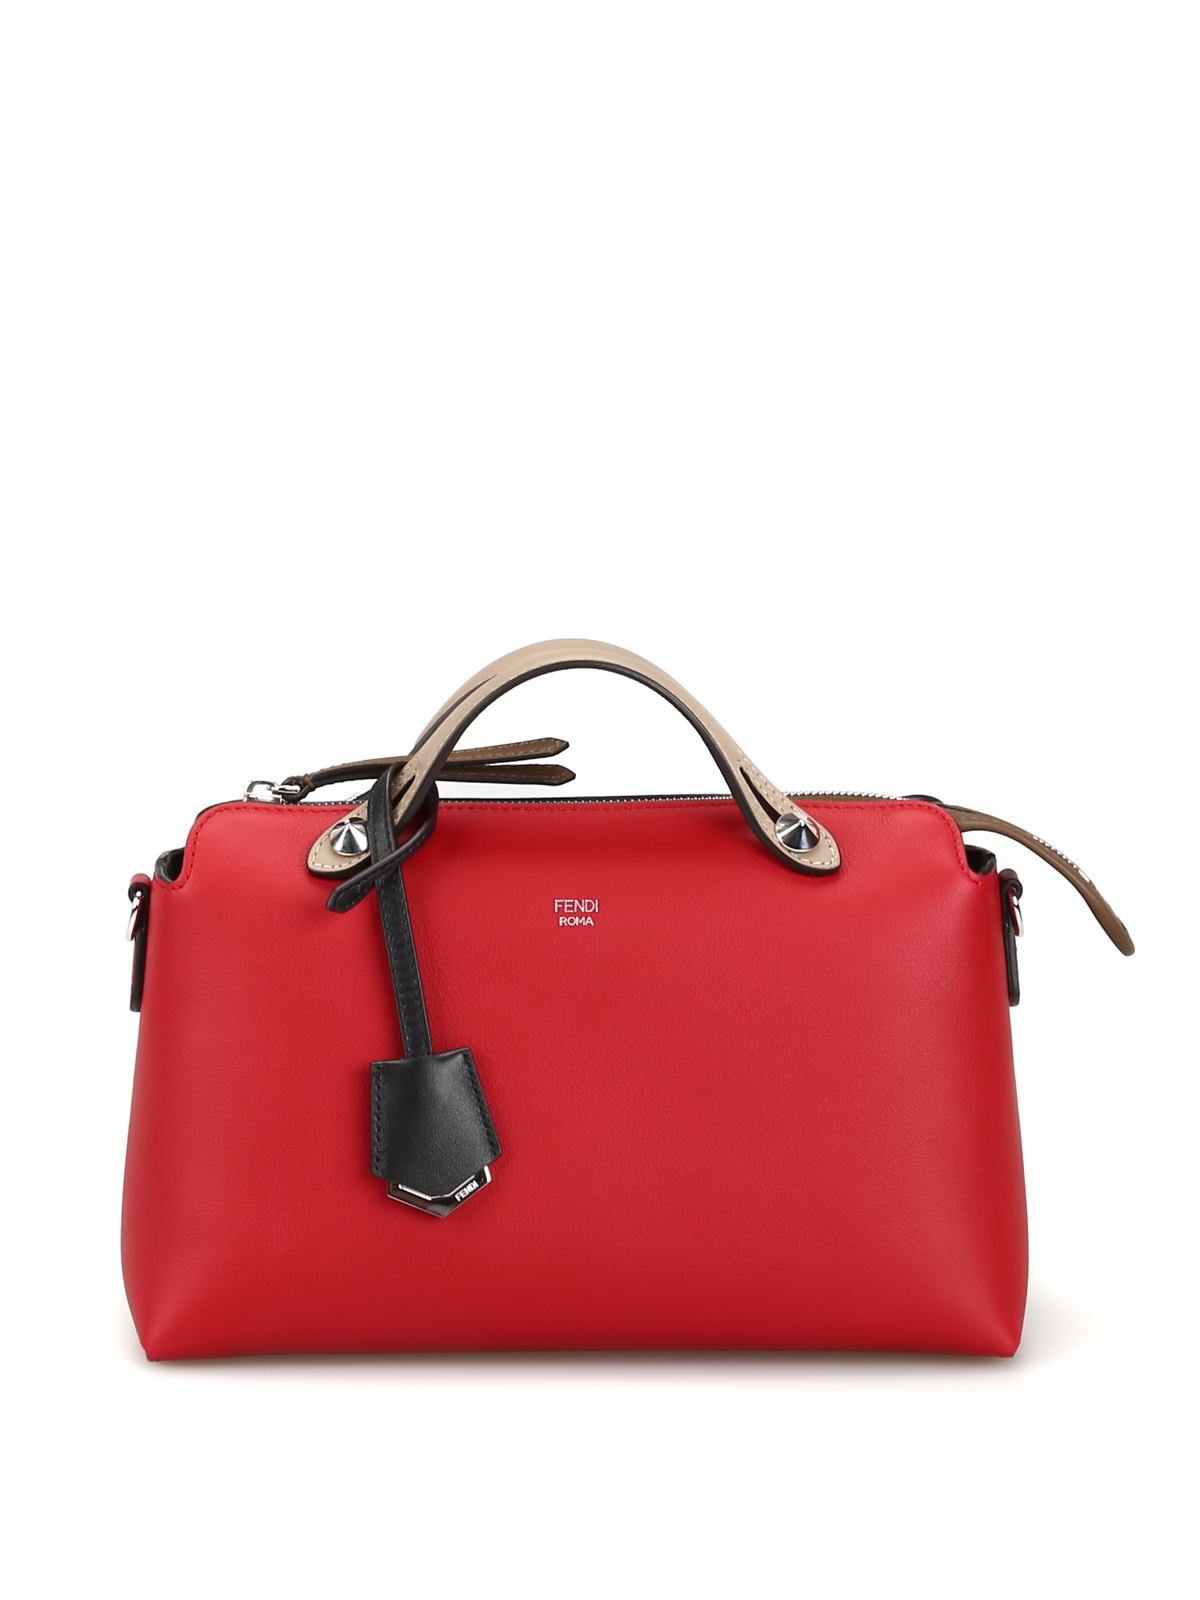 Fendi By The Way Medium Red Leather Bag | ModeSens